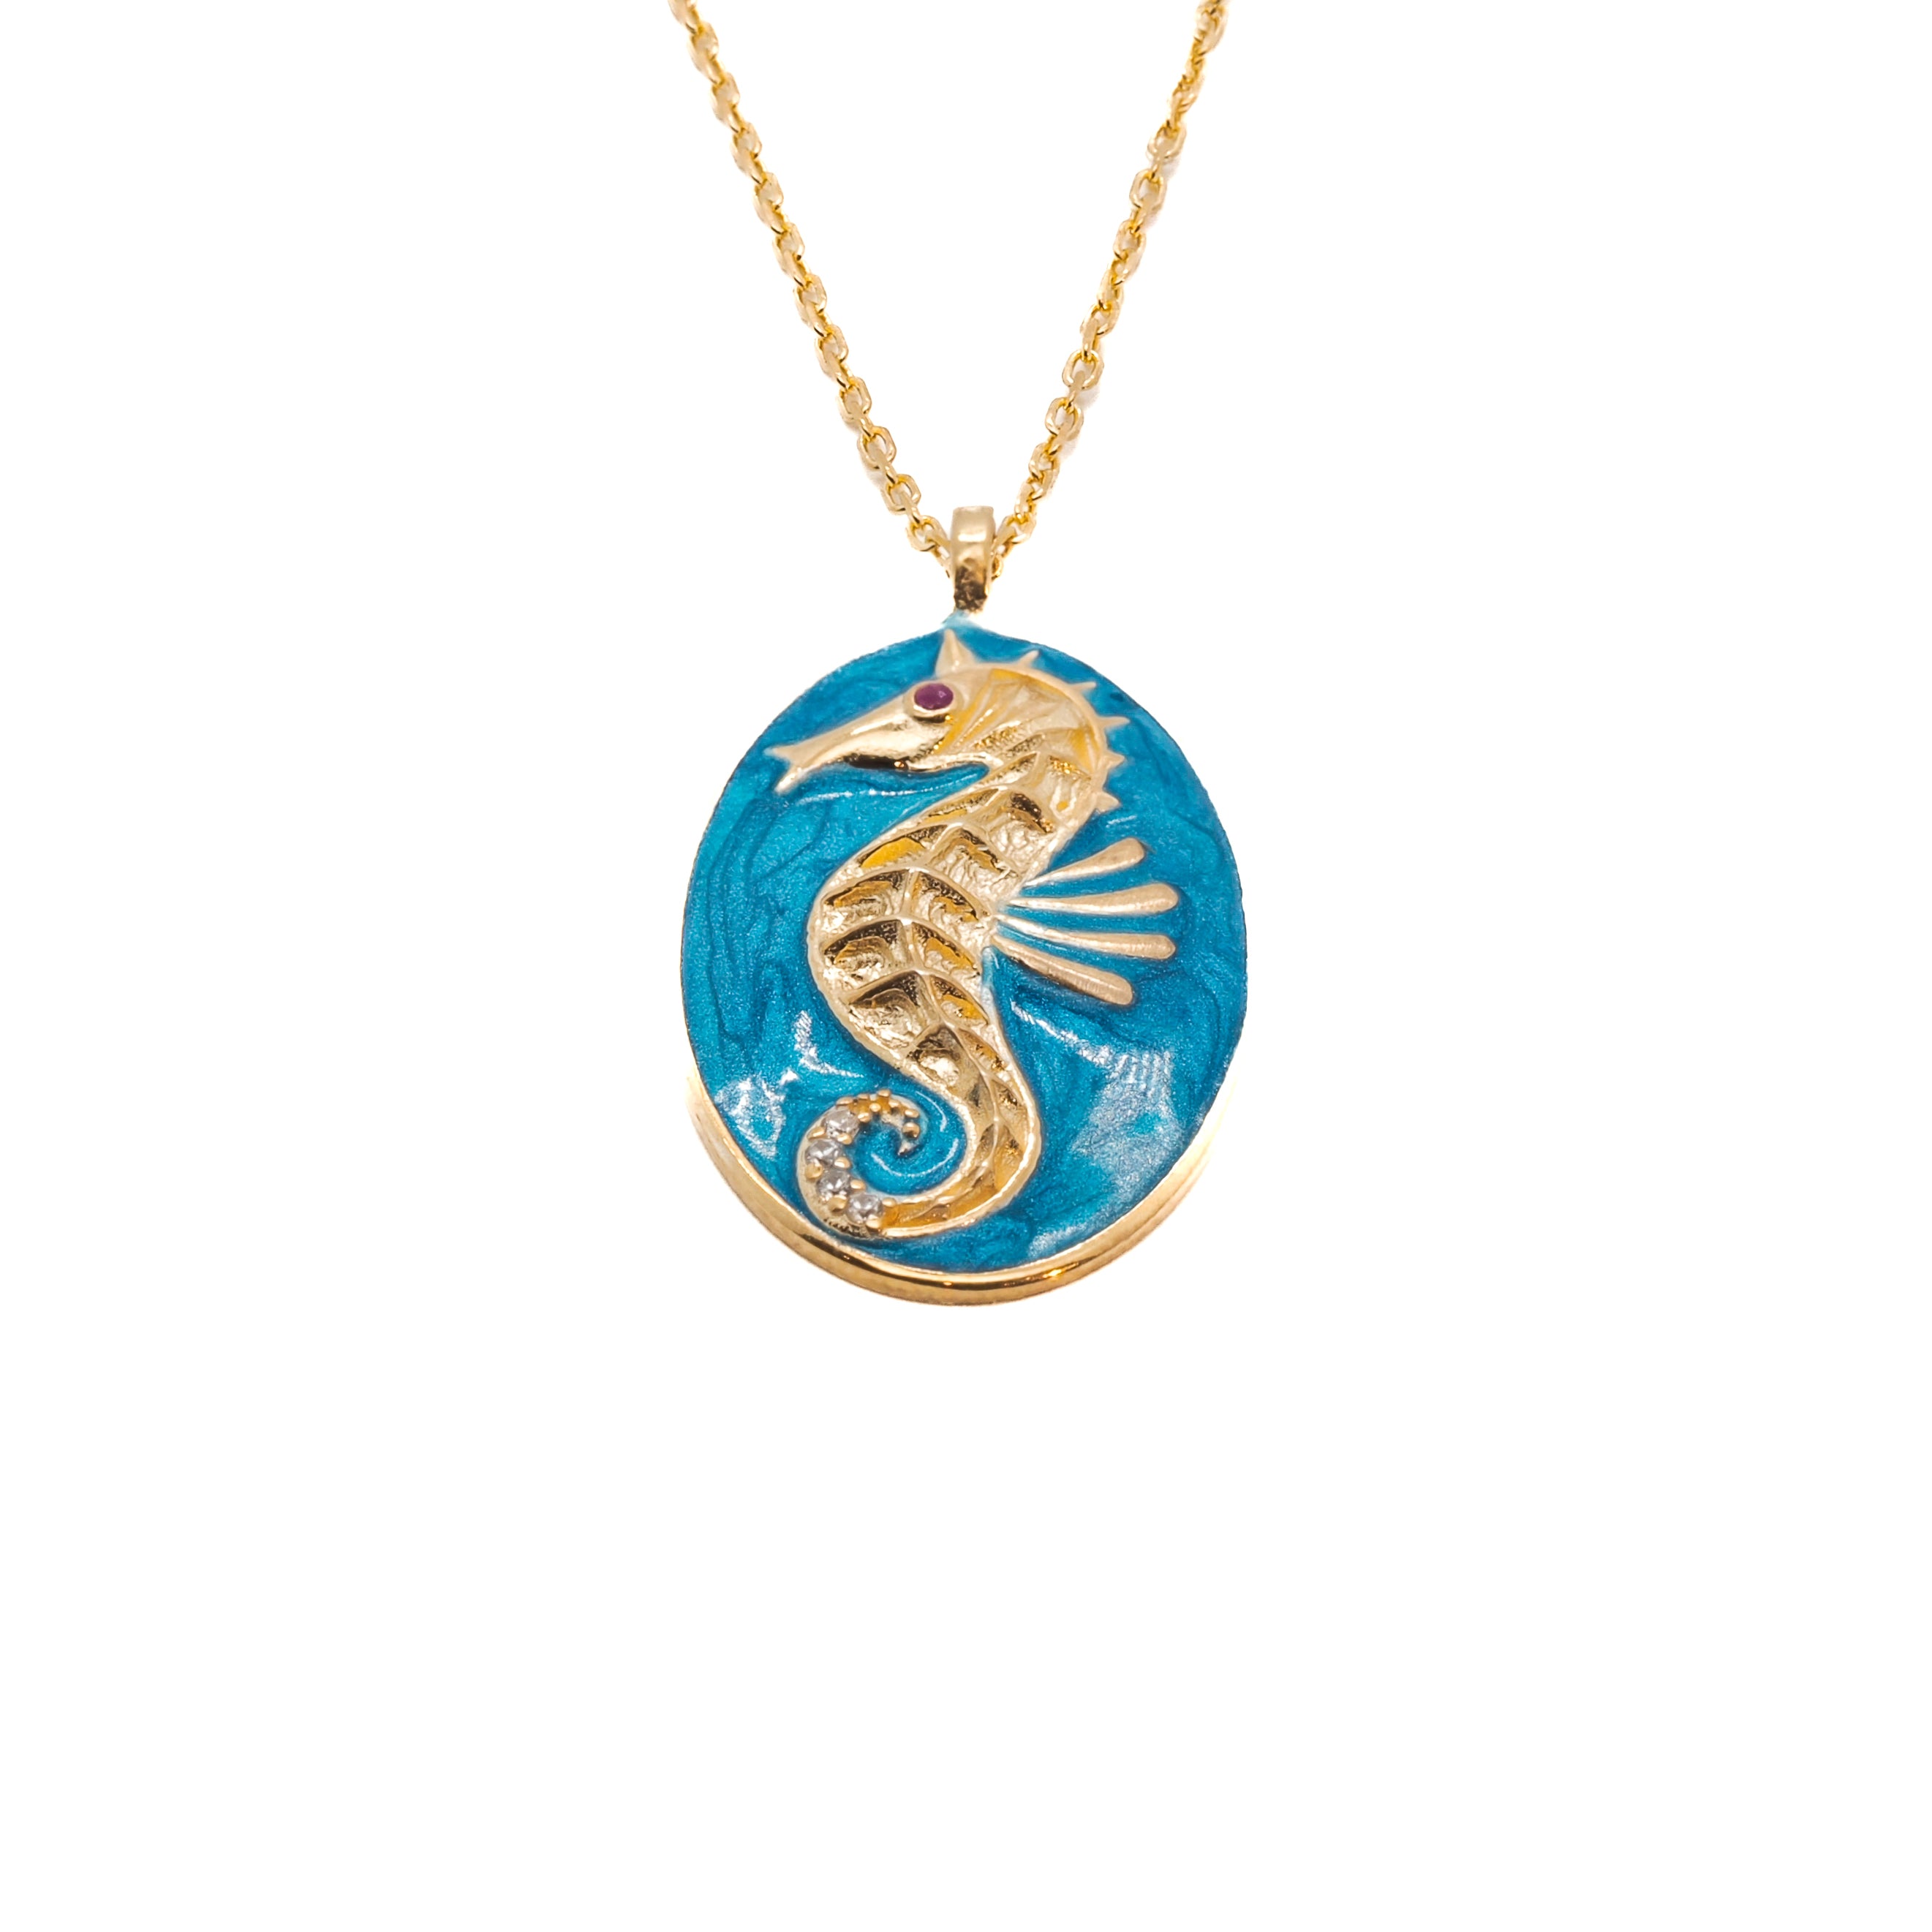 The Spirit Animal Blue Seahorse Necklace, featuring an exquisite seahorse pendant in captivating blue enamel, symbolizing strength, protection, and grace.